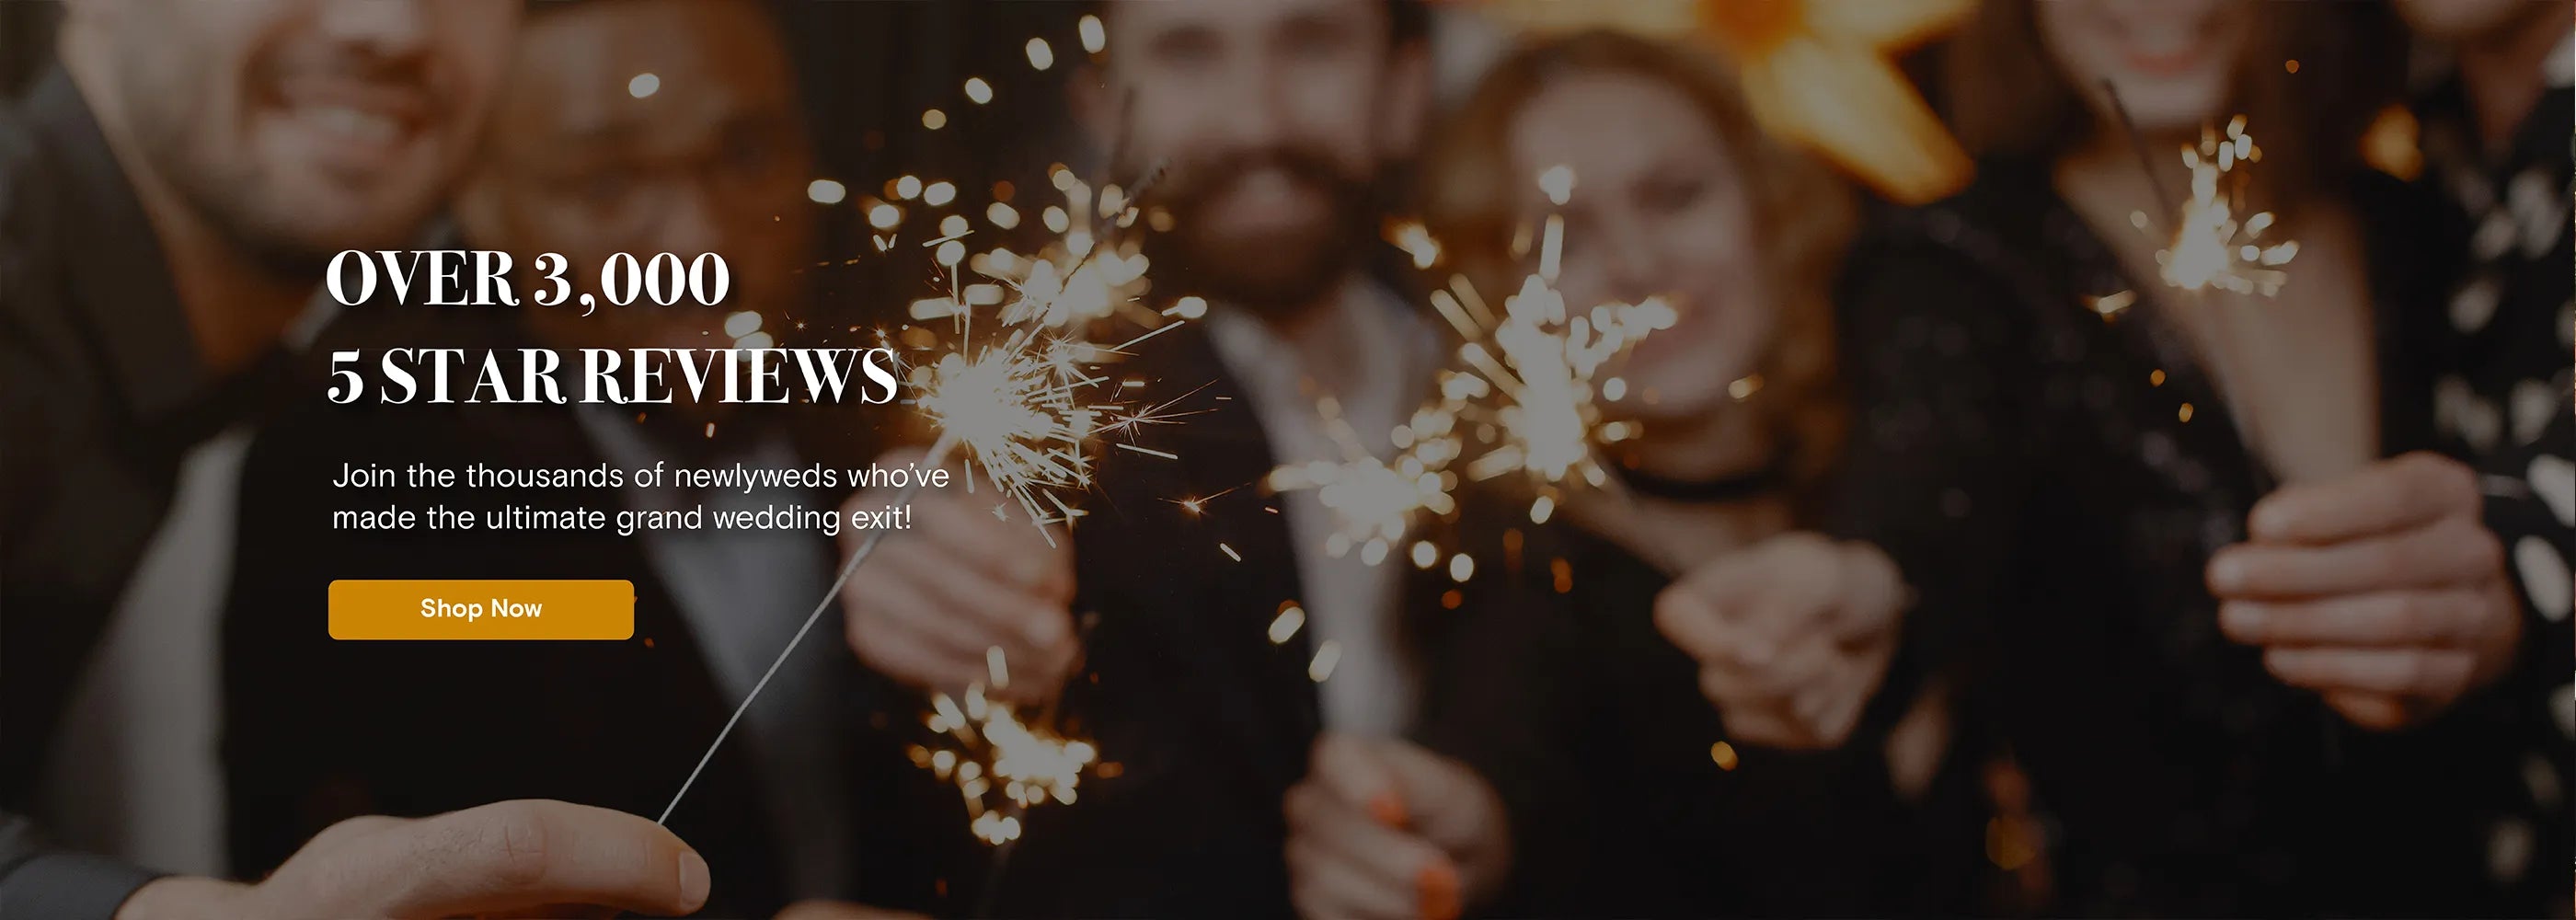 Breathtaking send off with sparklers for wedding as couple walks hand in hand.